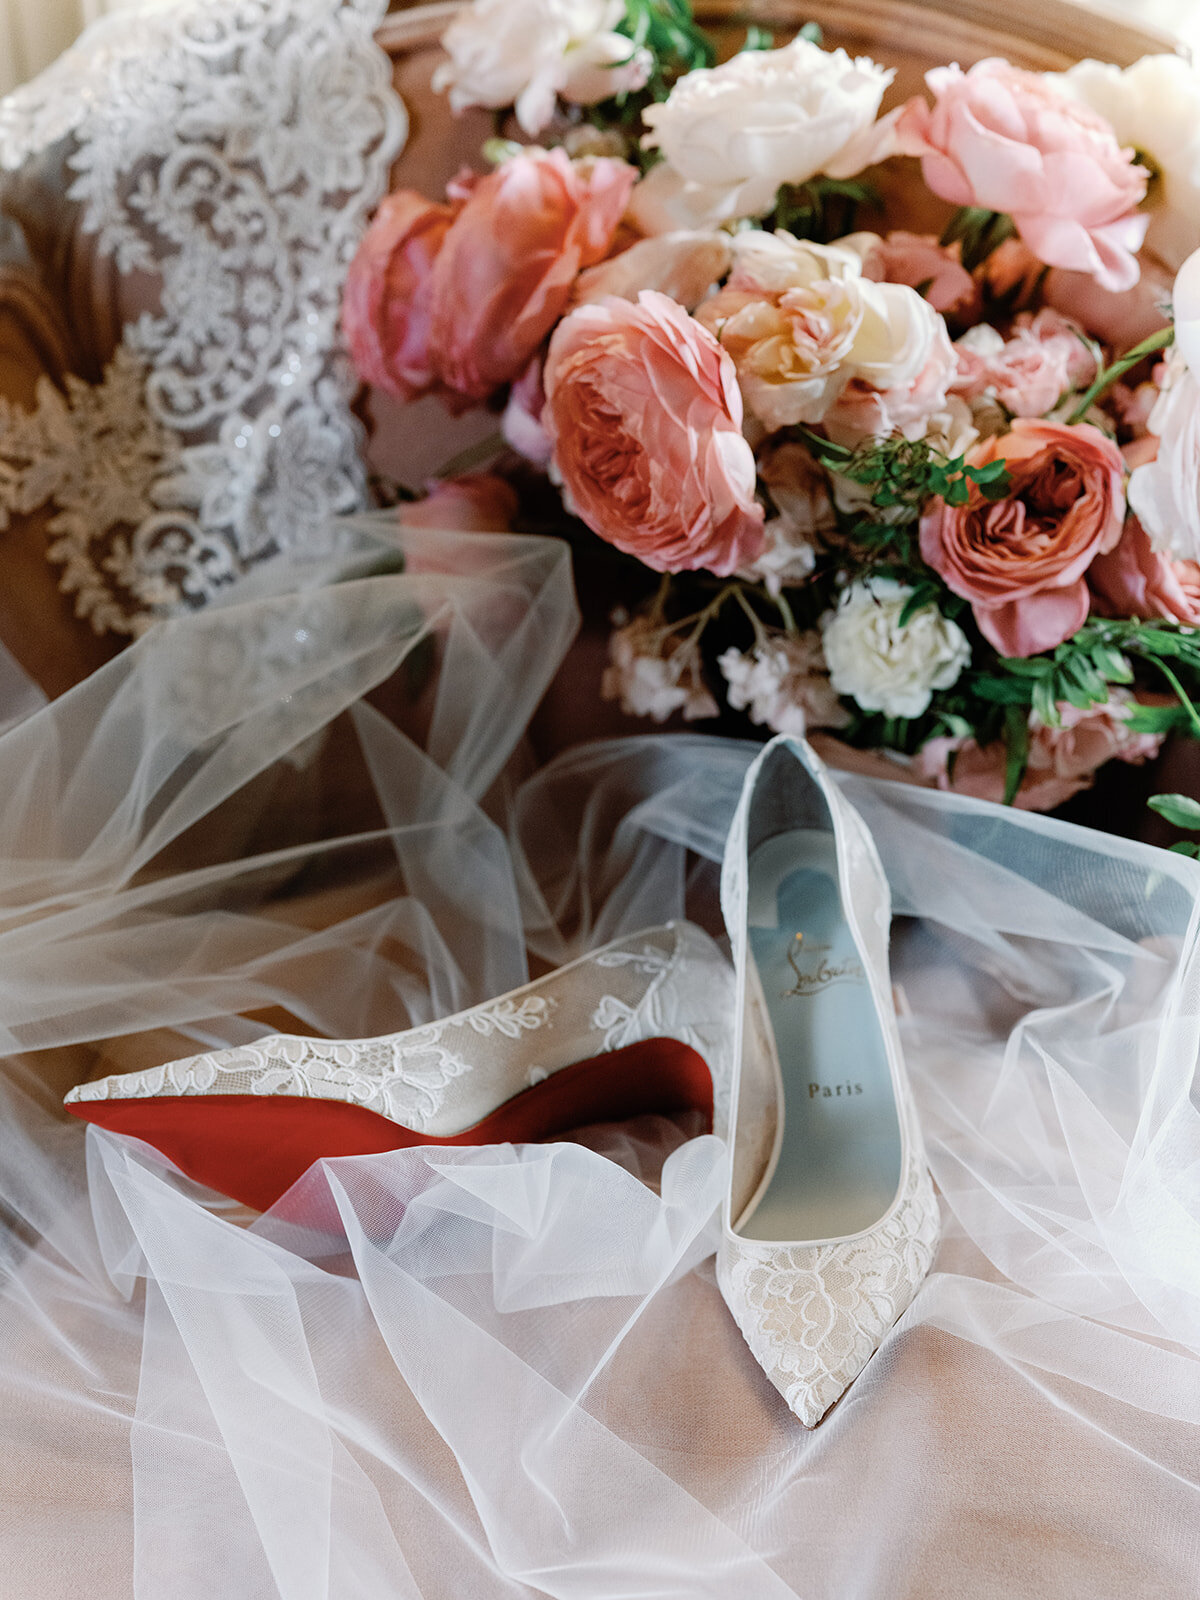 Bouquet, veil and shoes of bridel sitting on a chair